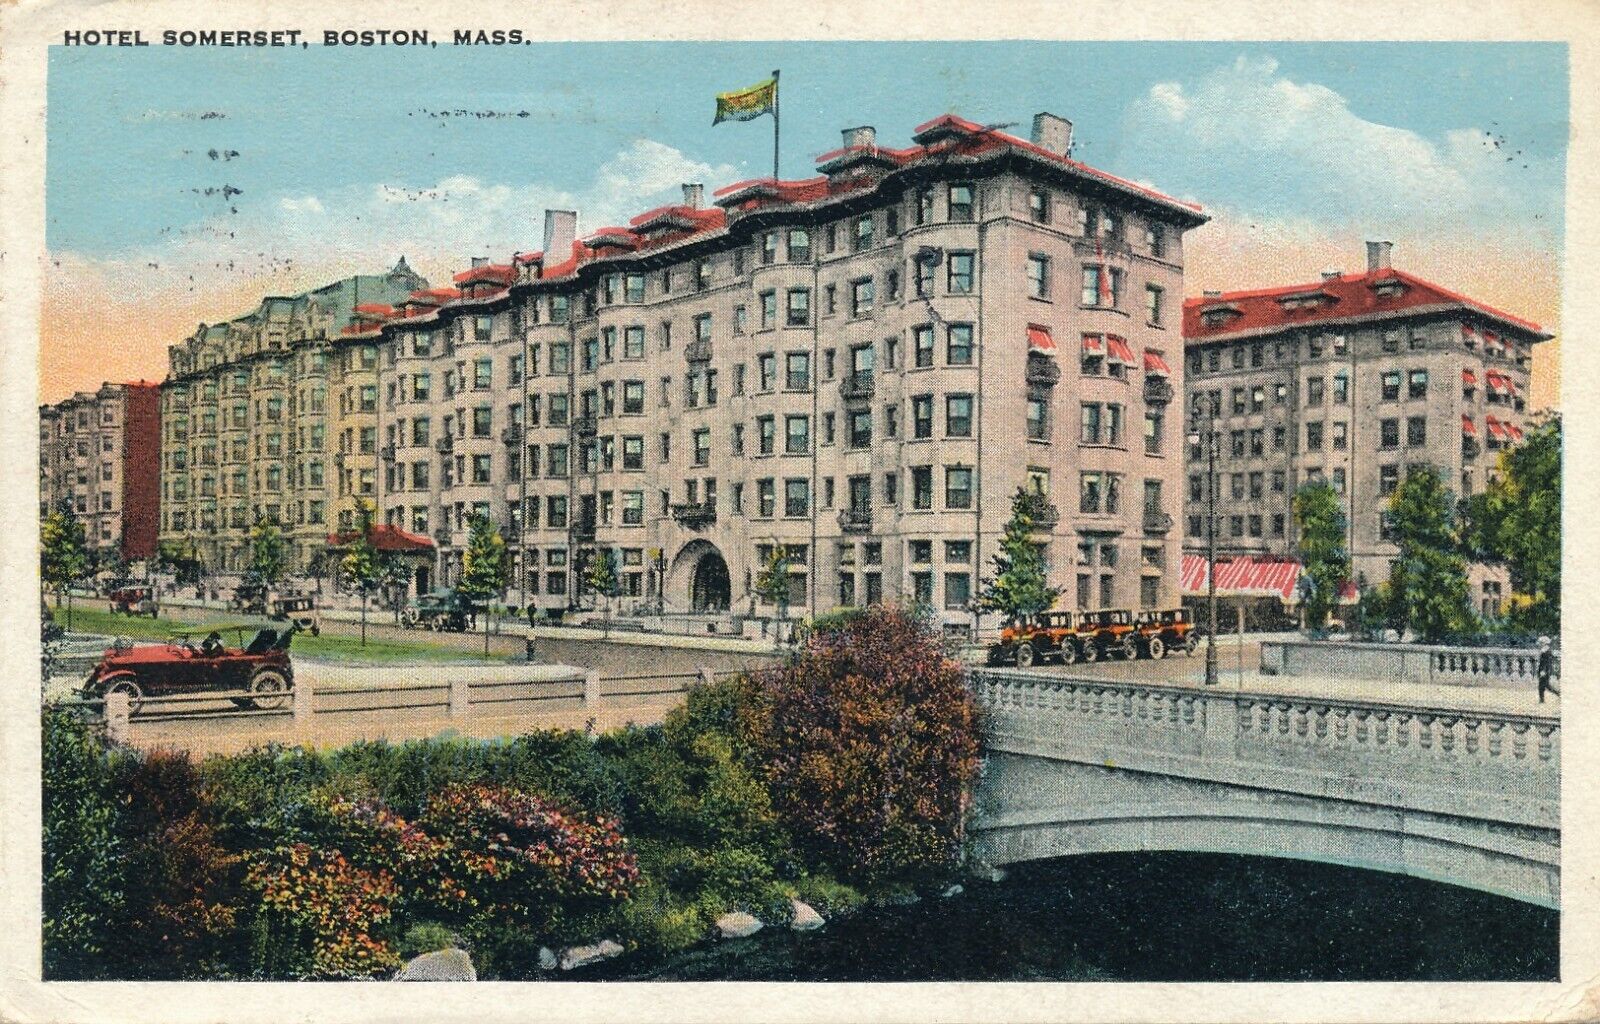 Hotel Somerset in Boston, MA 1927 posted with car antique postcard